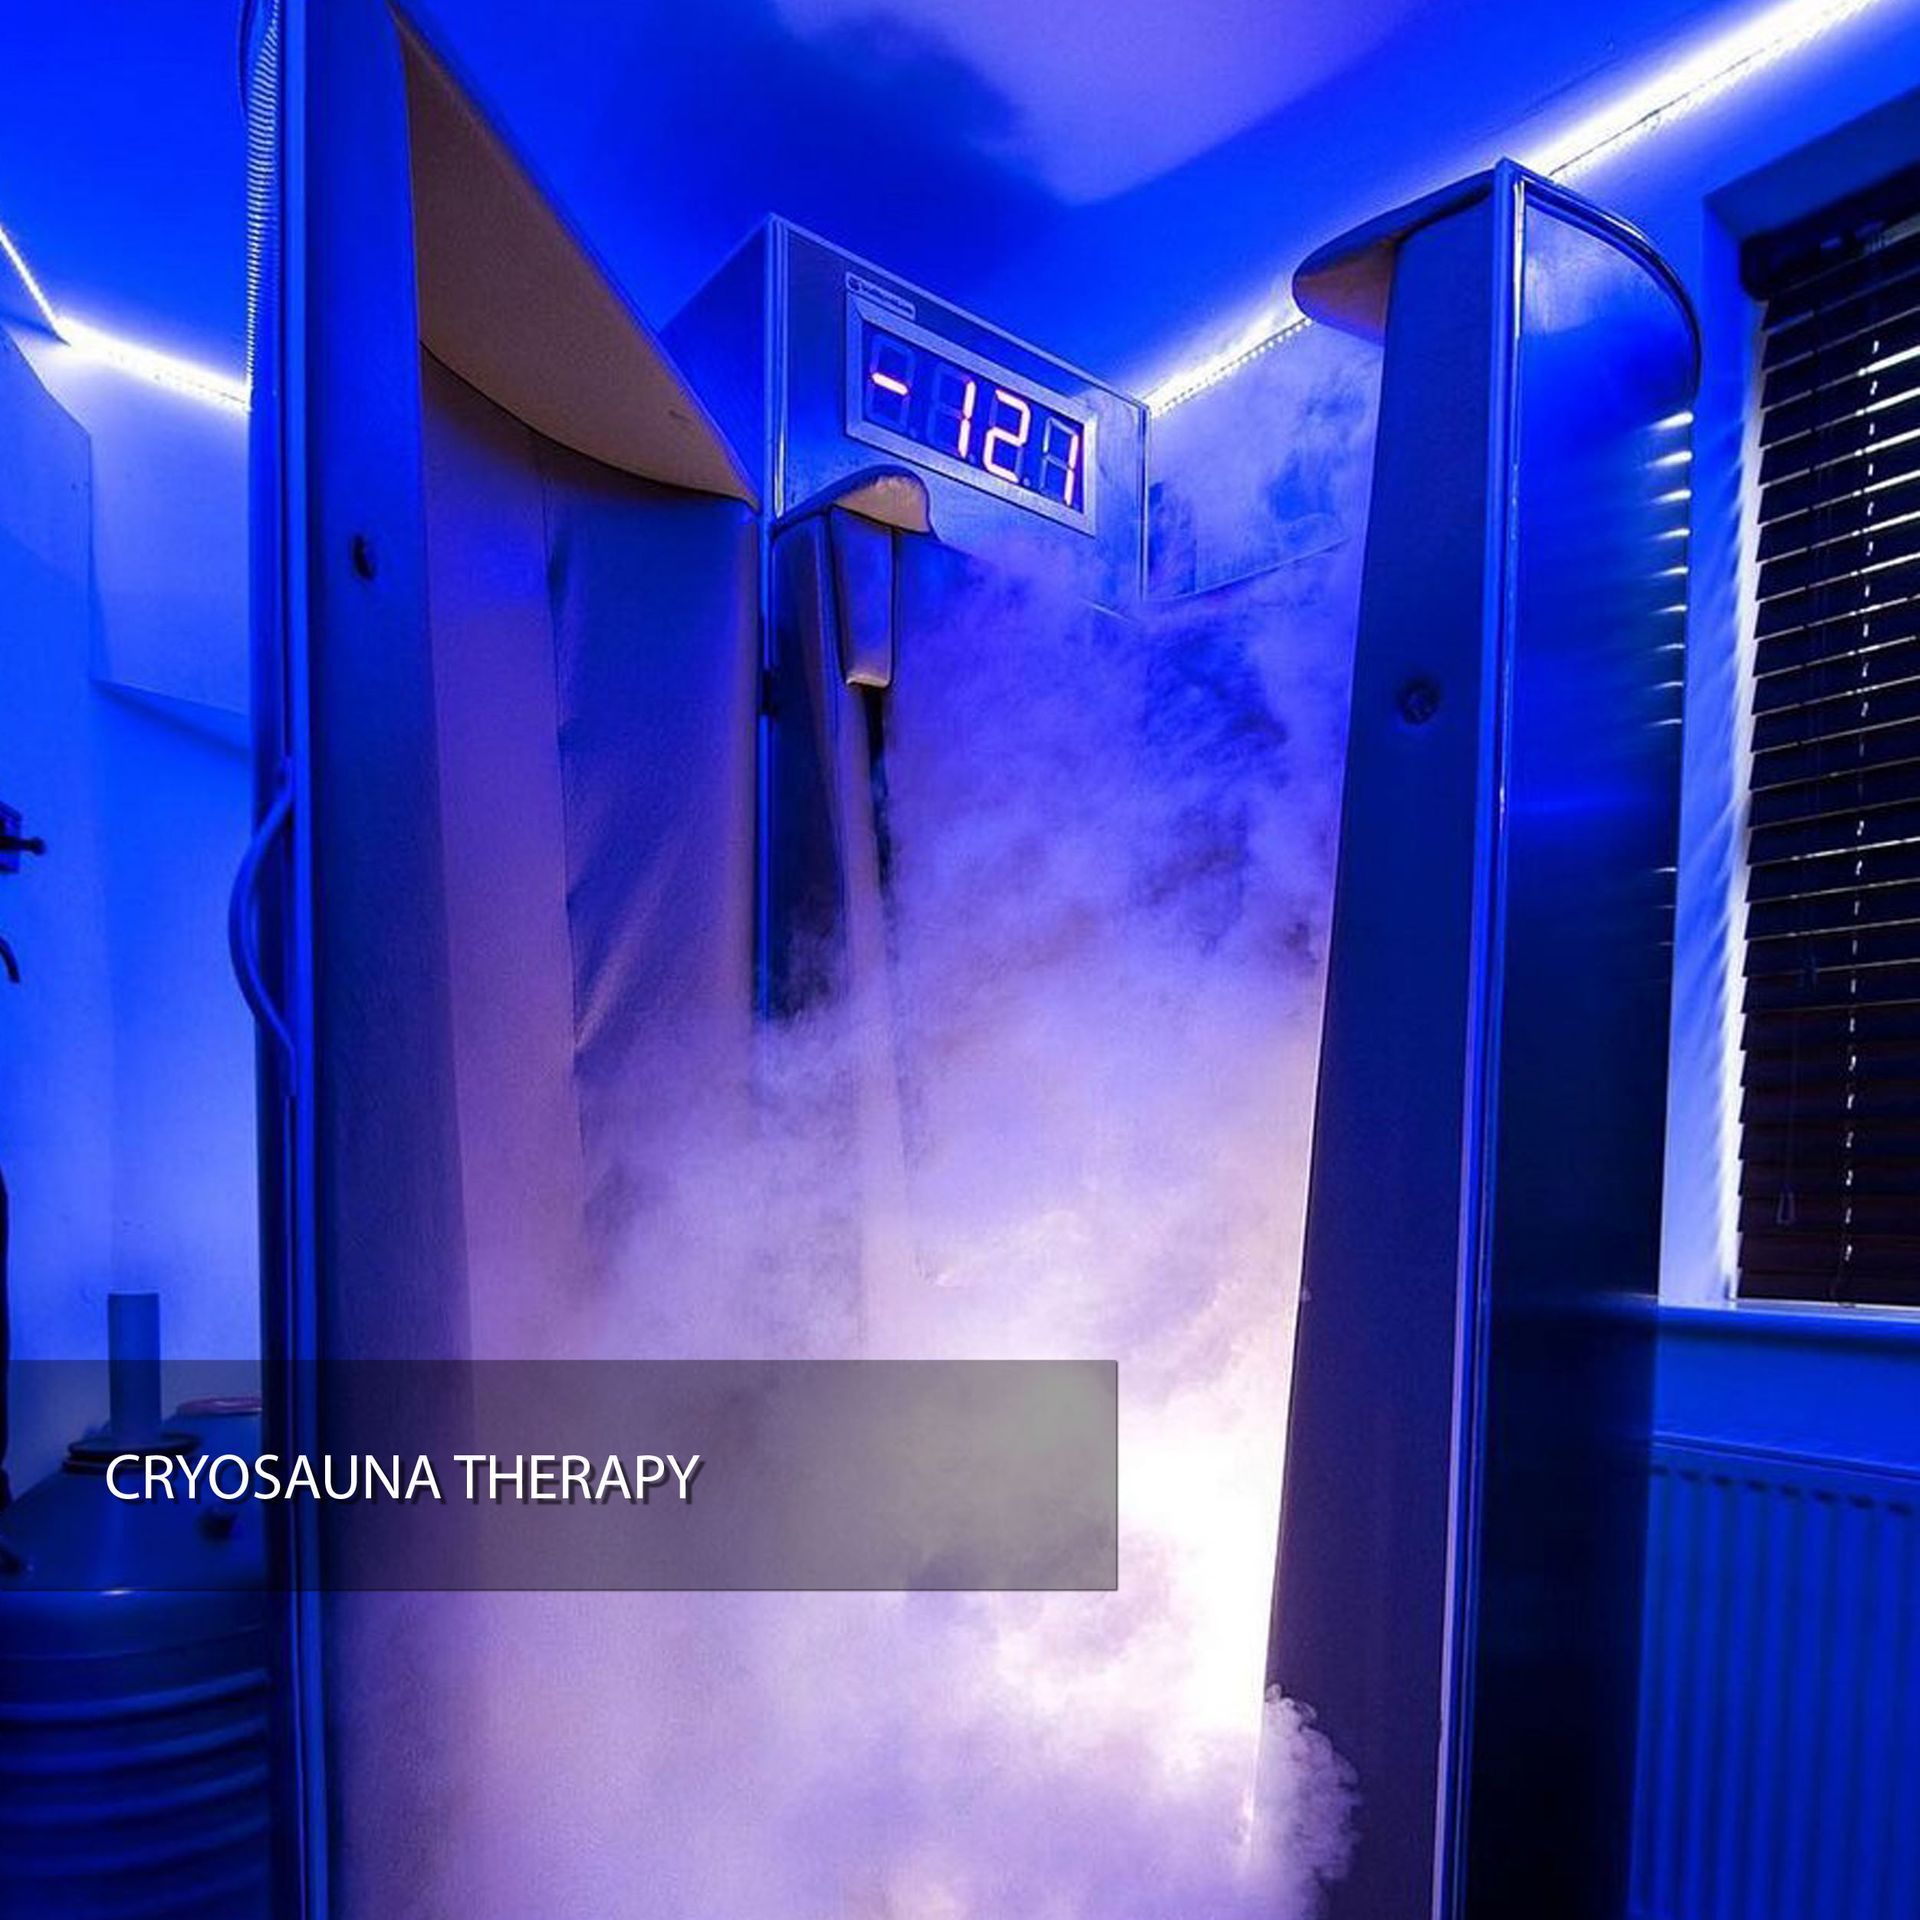 The First Part of the Dry Cold Plunge is Our Cryosauna